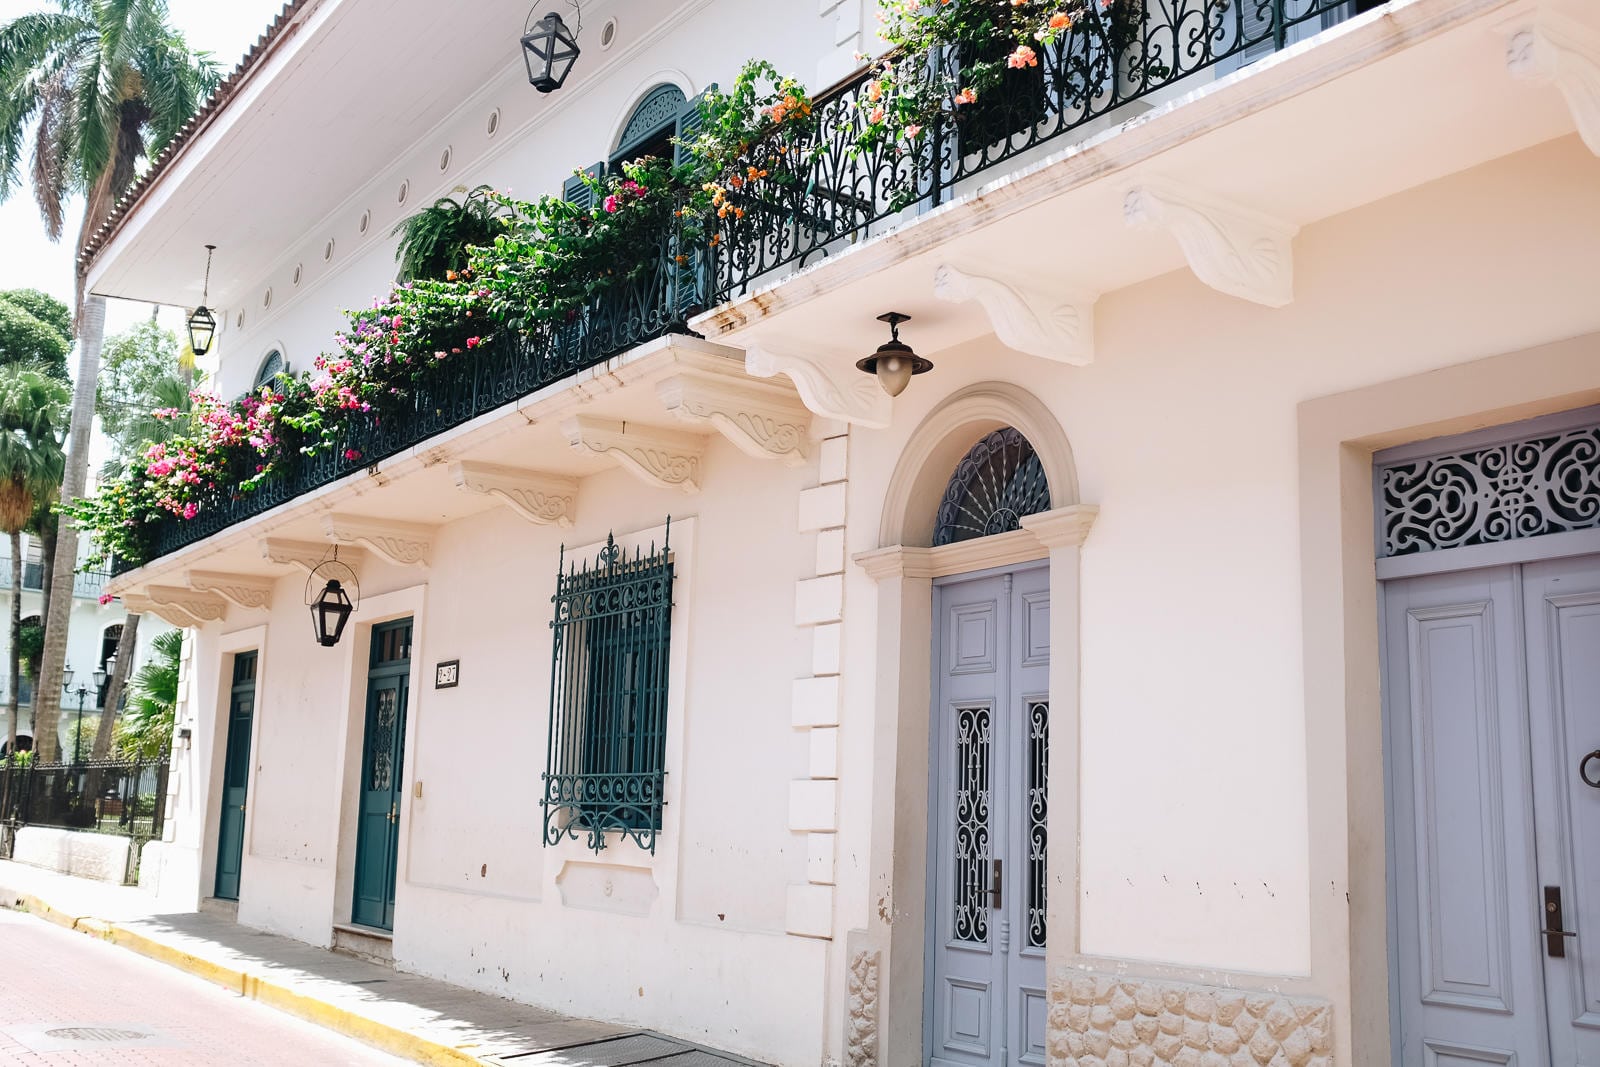 A Travel Guide to Casco Viejo in Panama City